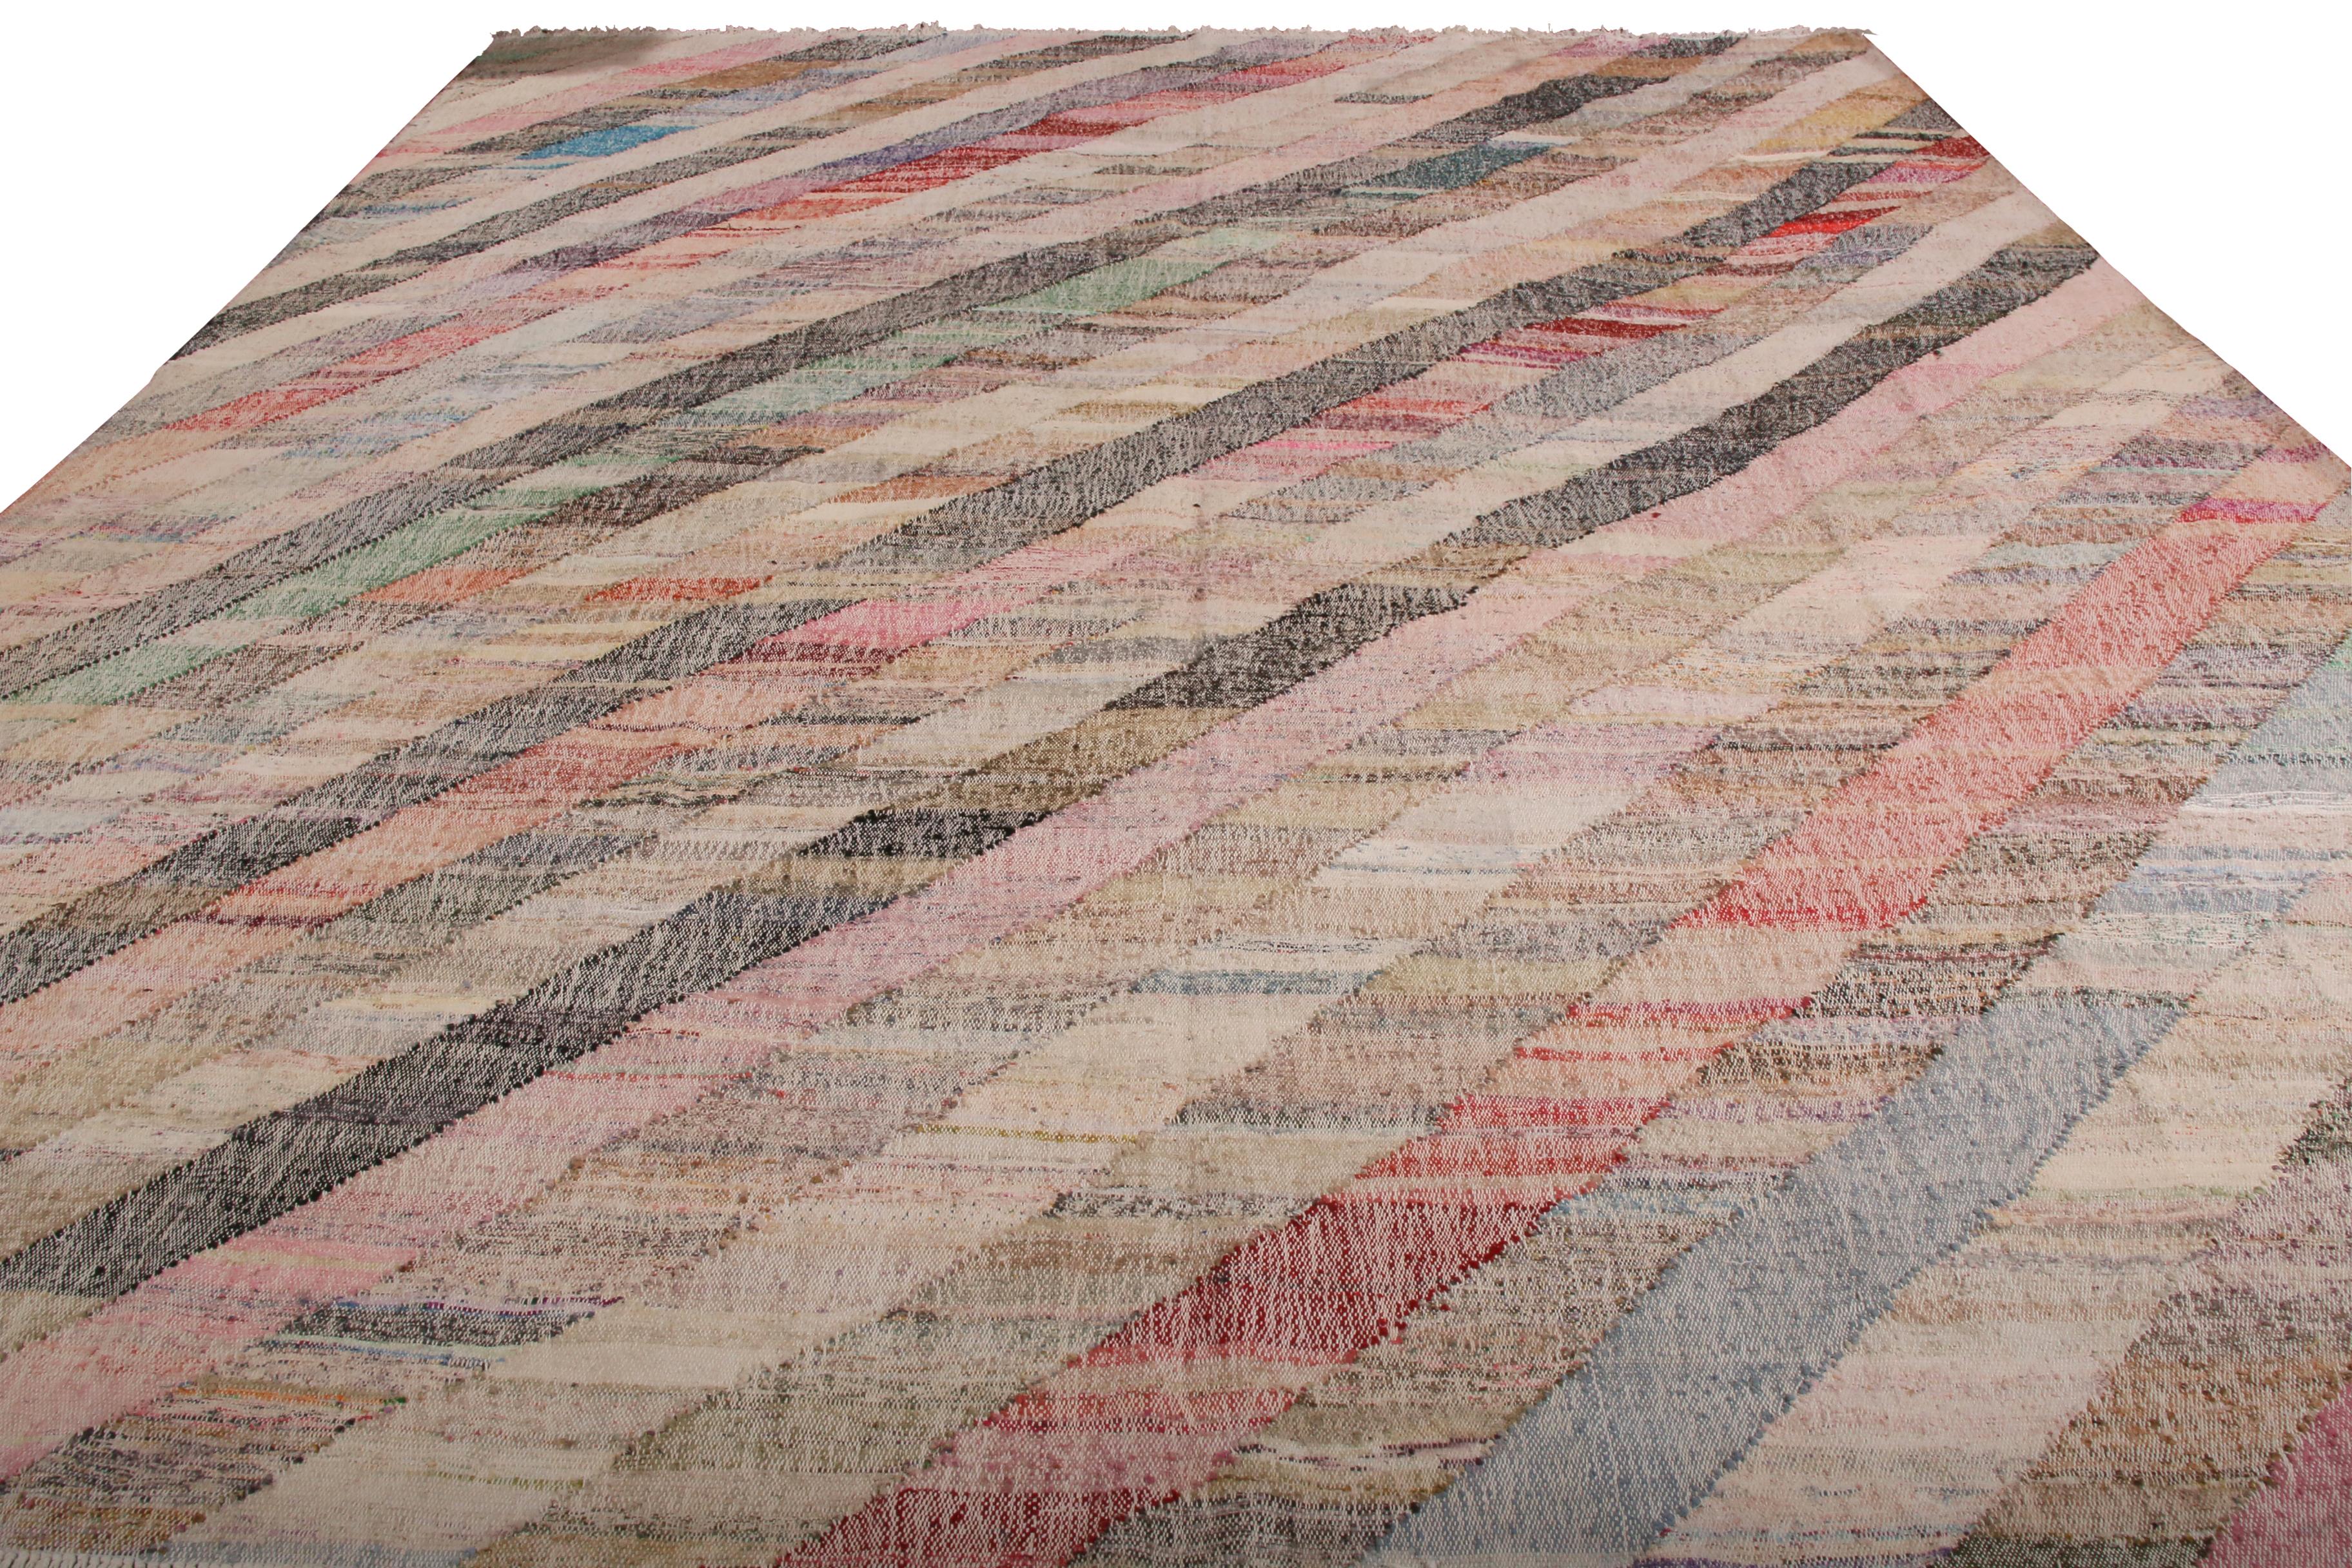 Sporting an eccentric play of soothing and rustic hues in the field, this contemporary Kilim represents a selection of distinct new patterns joining Rug & Kilim’s new and modern collection, uniquely handwoven from the yarns of Classic textiles and